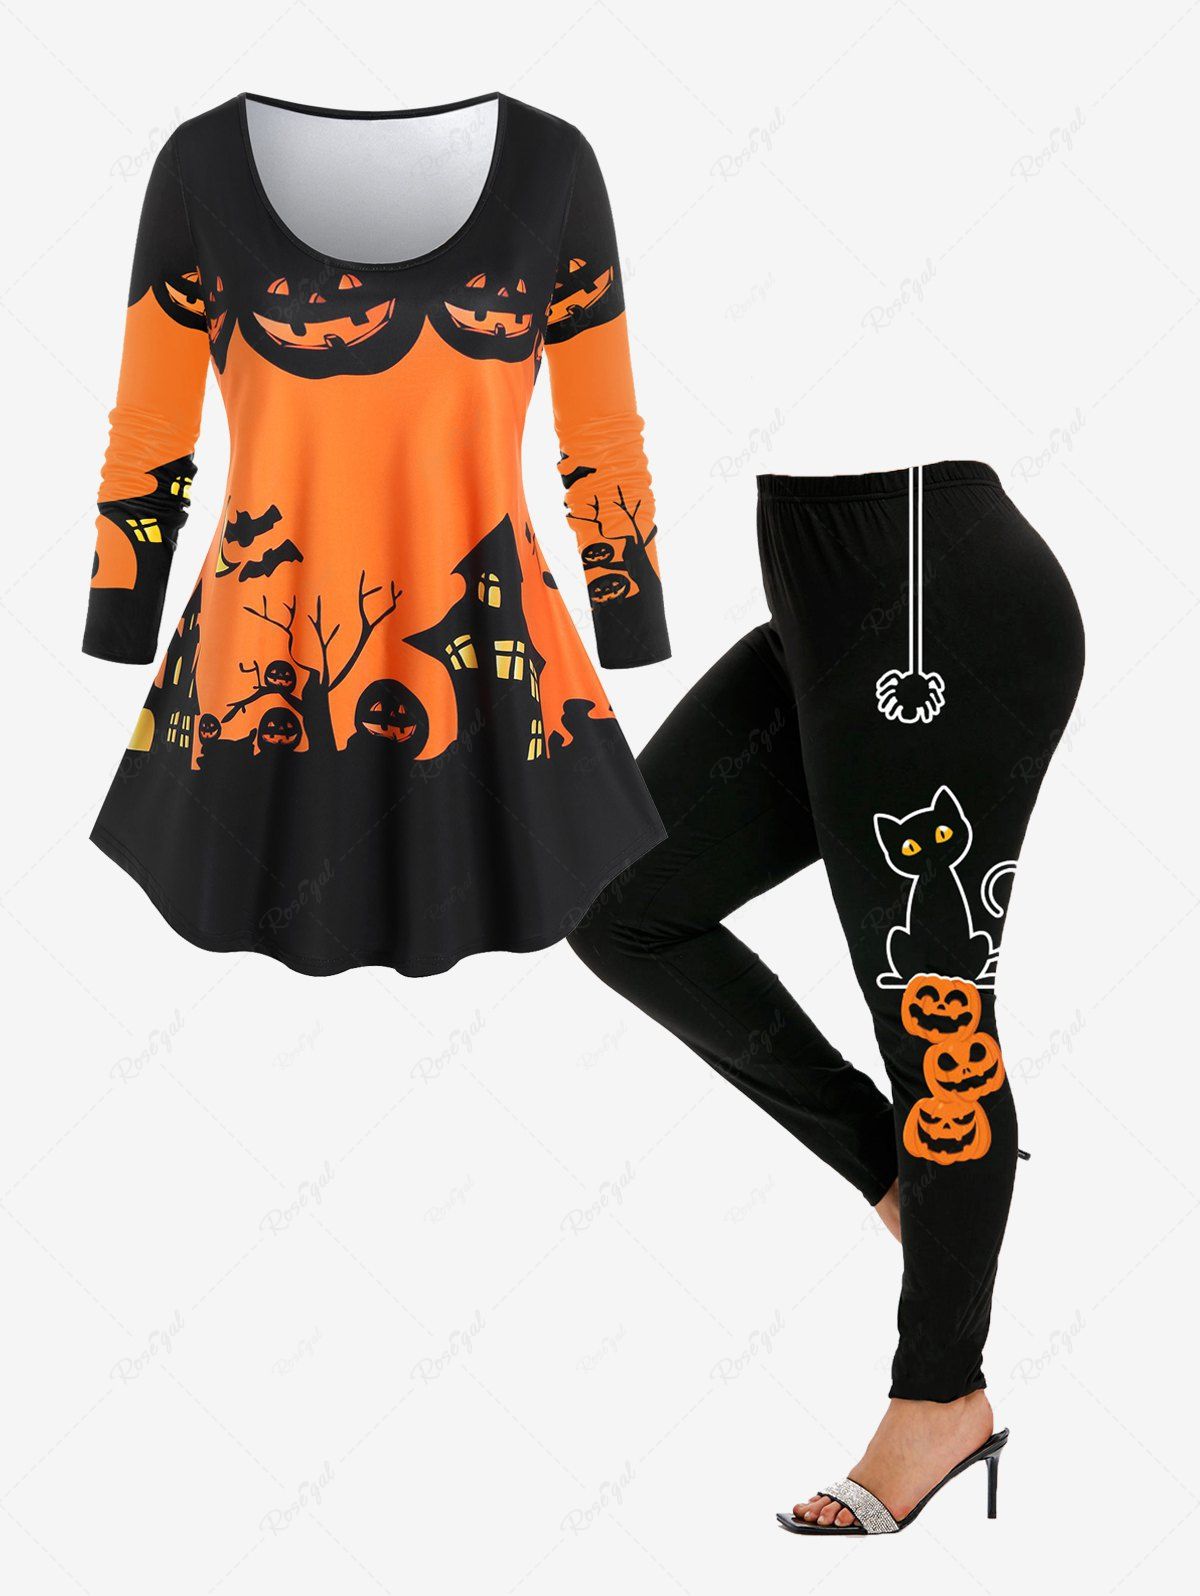 New Halloween Pumpkin Castle Print Tee and Cat Spider Print Leggings Outfit  